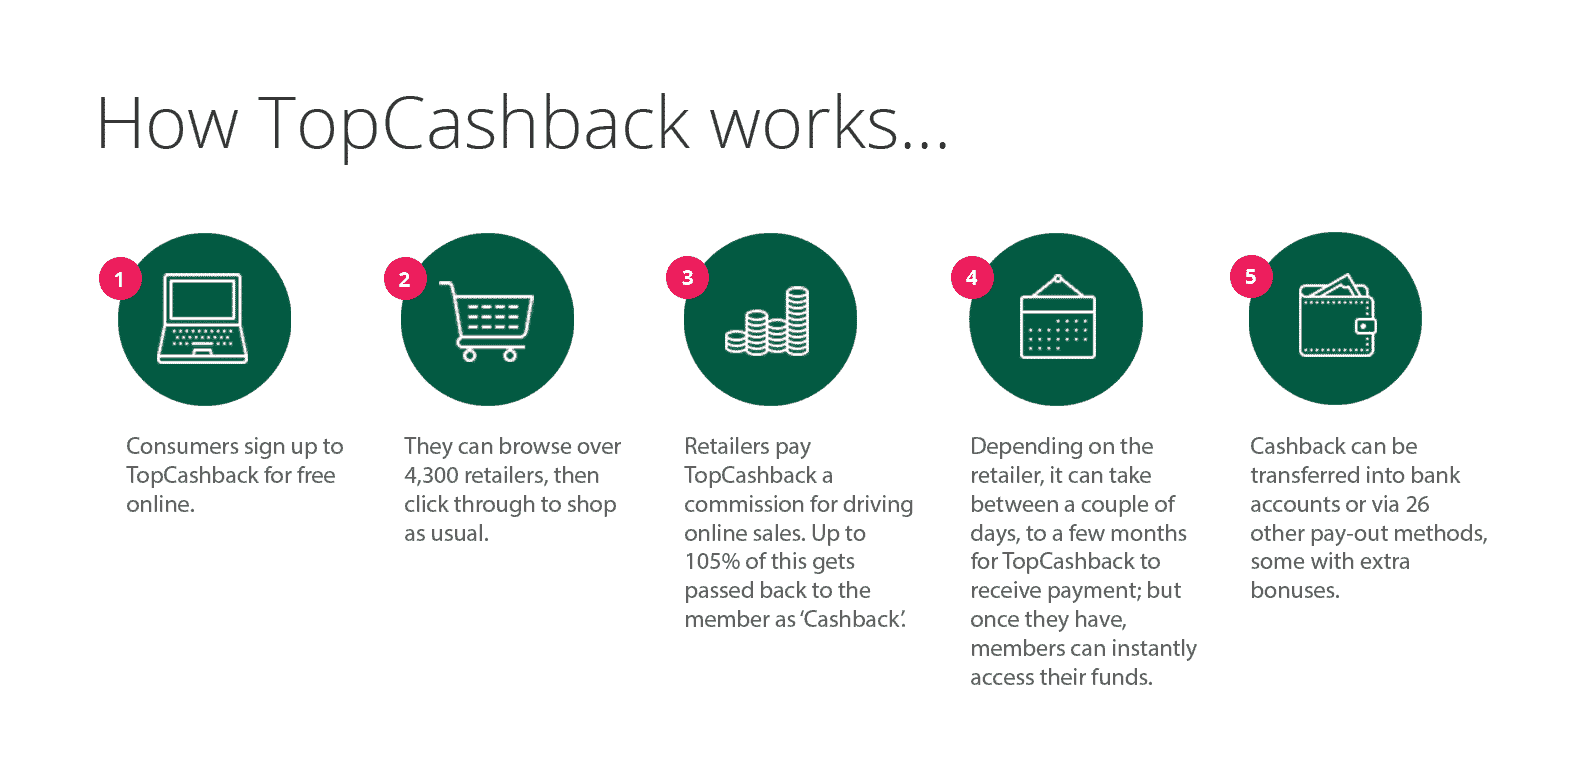 How TopCashBack works listing the 5 steps on how it works